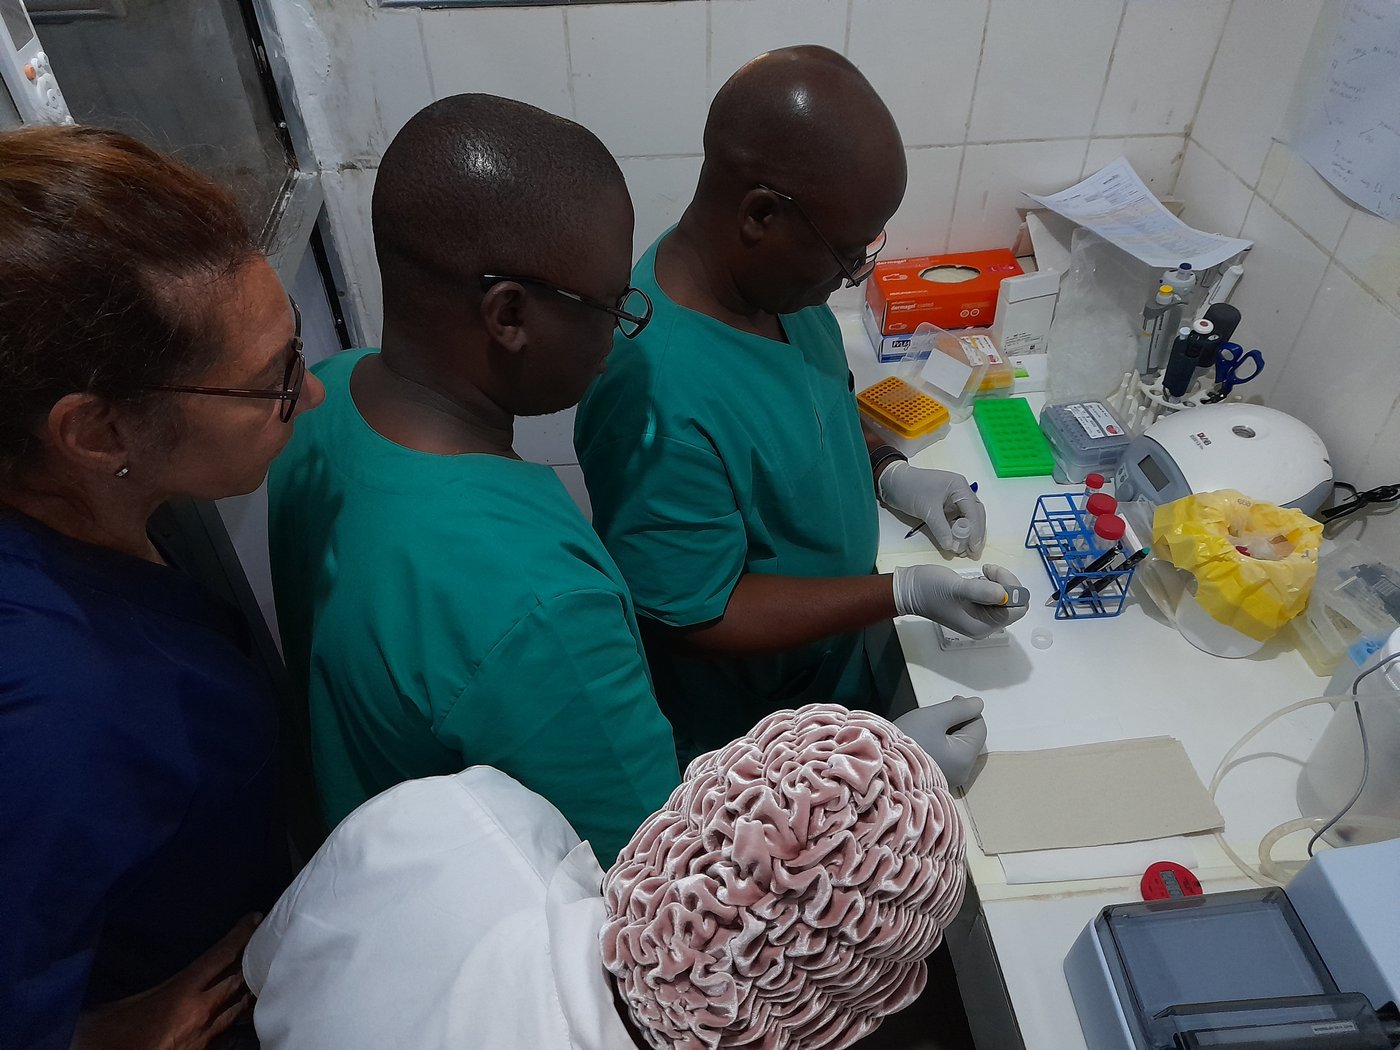 A laboratory scene in Guinea. One local lab staff is pipetting while the trainer and two others are observing.